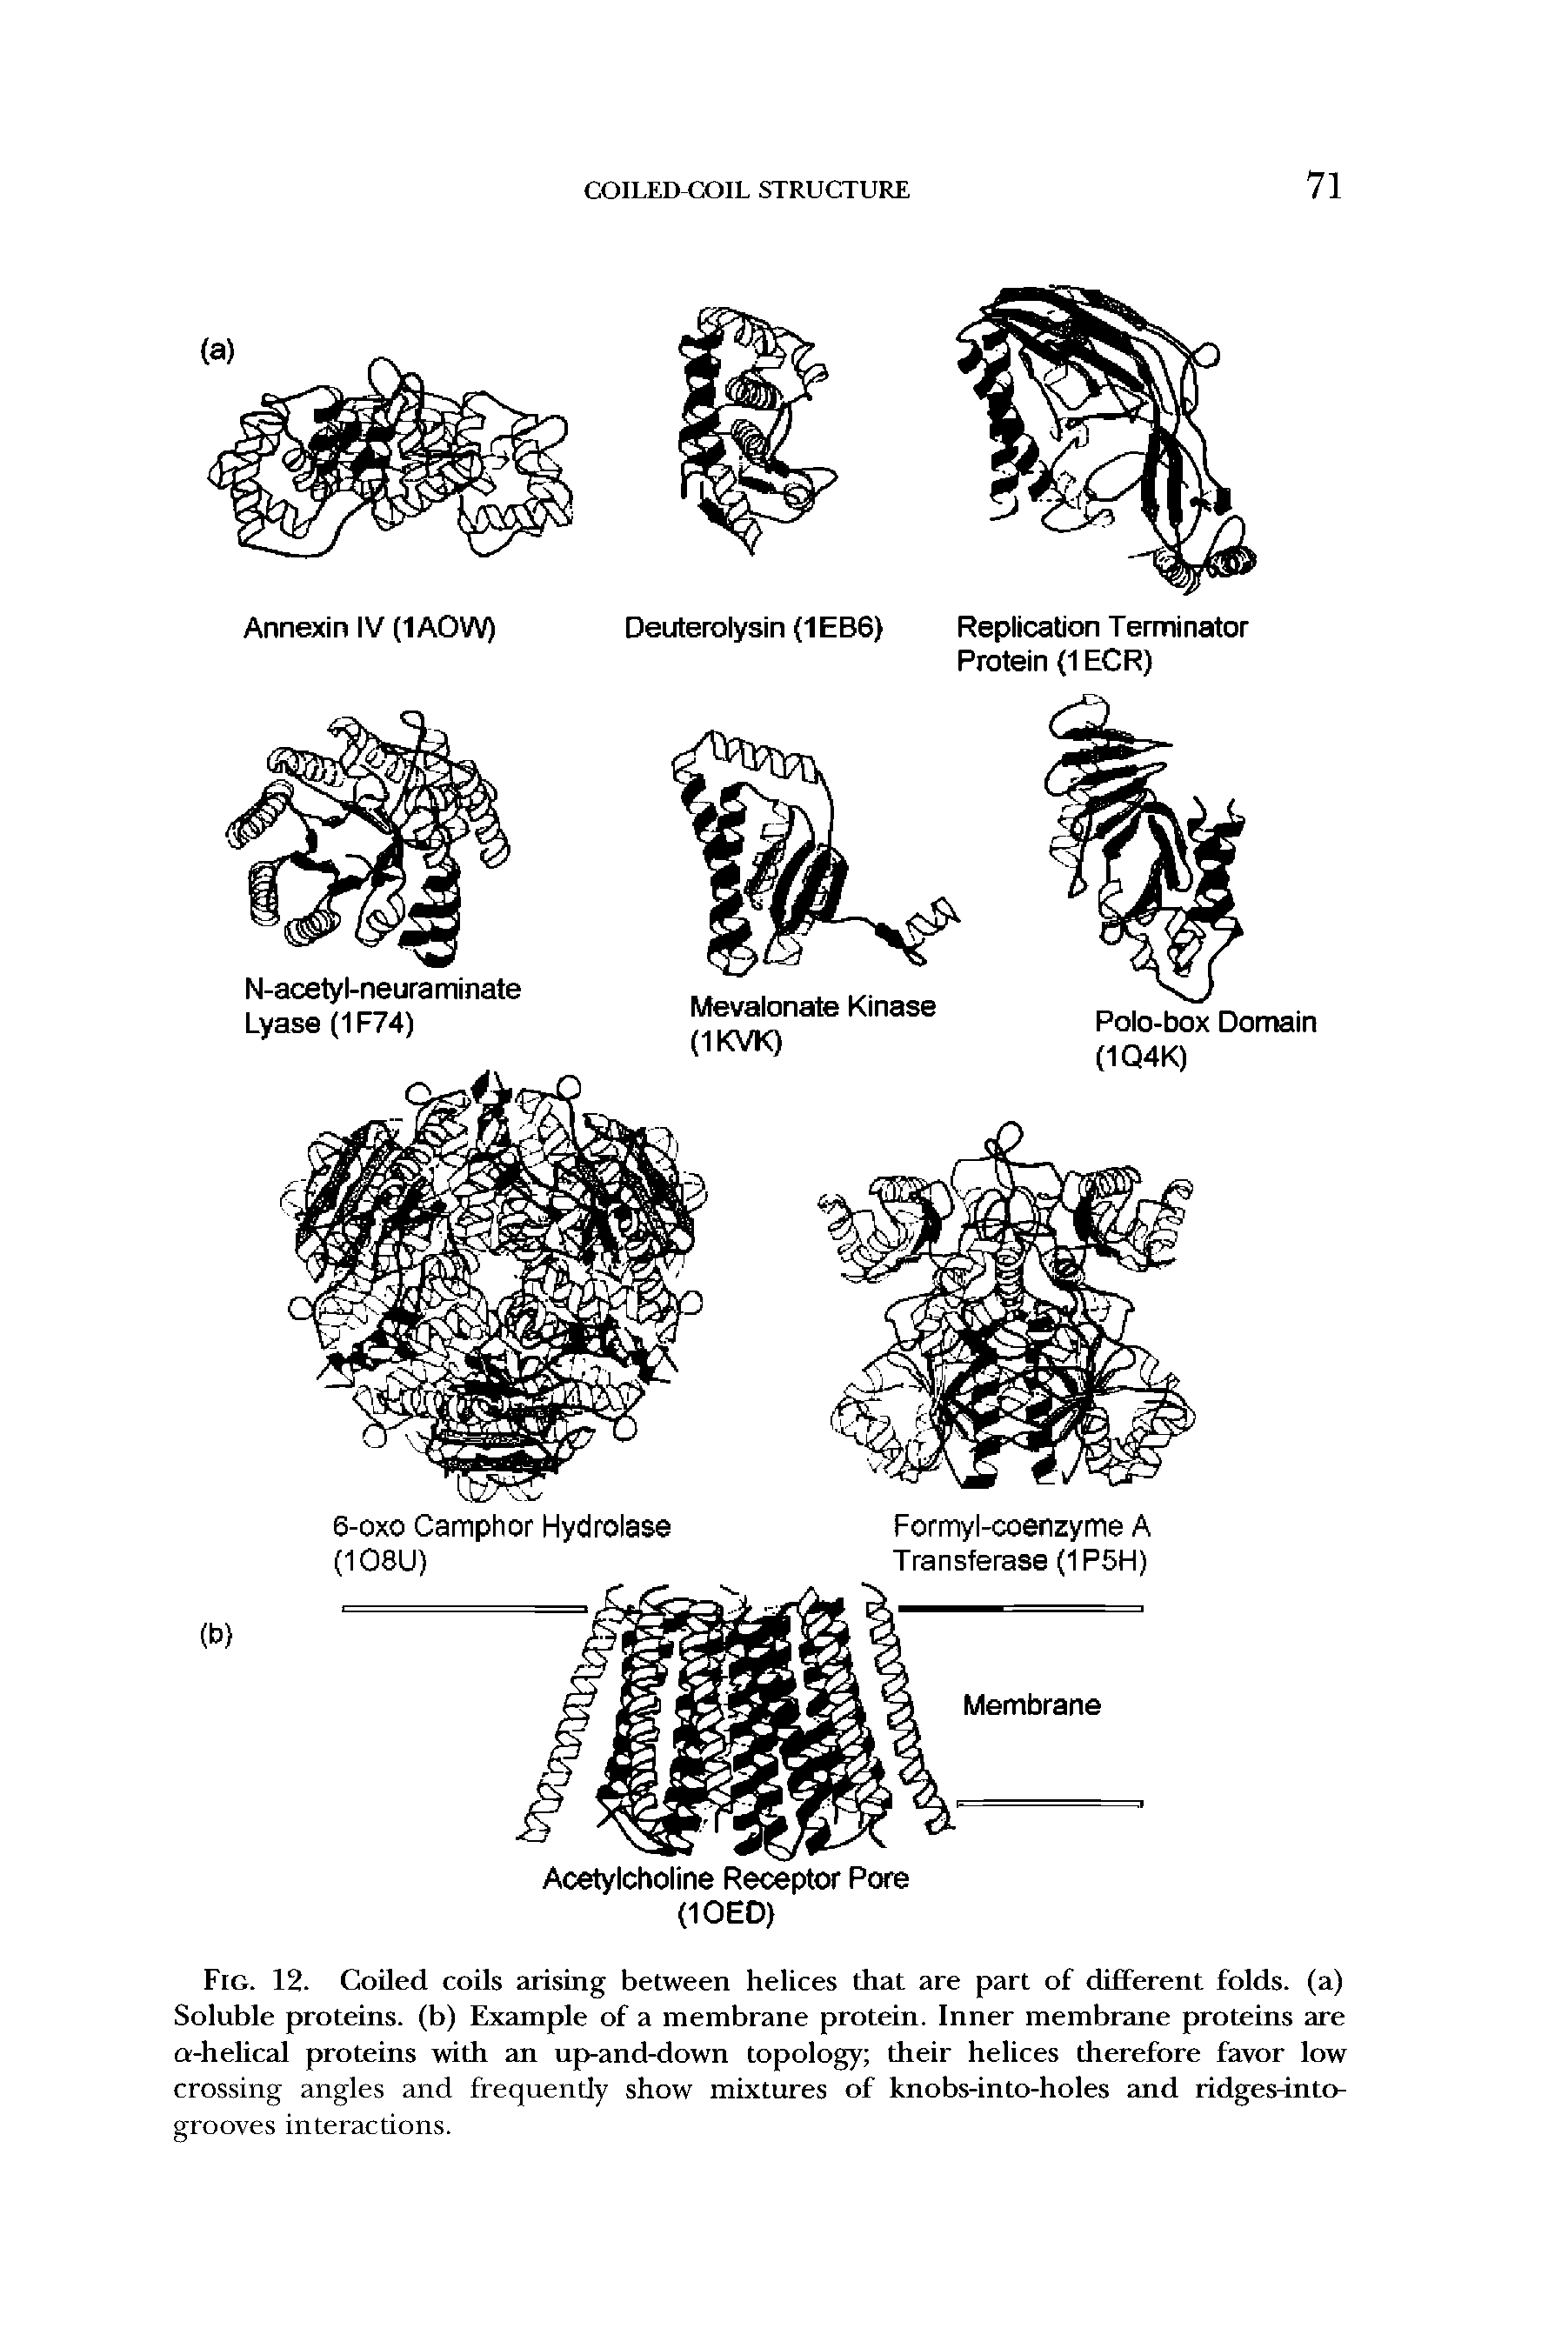 Fig. 12. Coiled coils arising between helices that are part of different folds, (a) Soluble proteins, (b) Example of a membrane protein. Inner membrane proteins are Q-helical proteins with an up-and-down topology their helices therefore favor low crossing angles and frequently show mixtures of knobs-into-holes and ridges-into-...